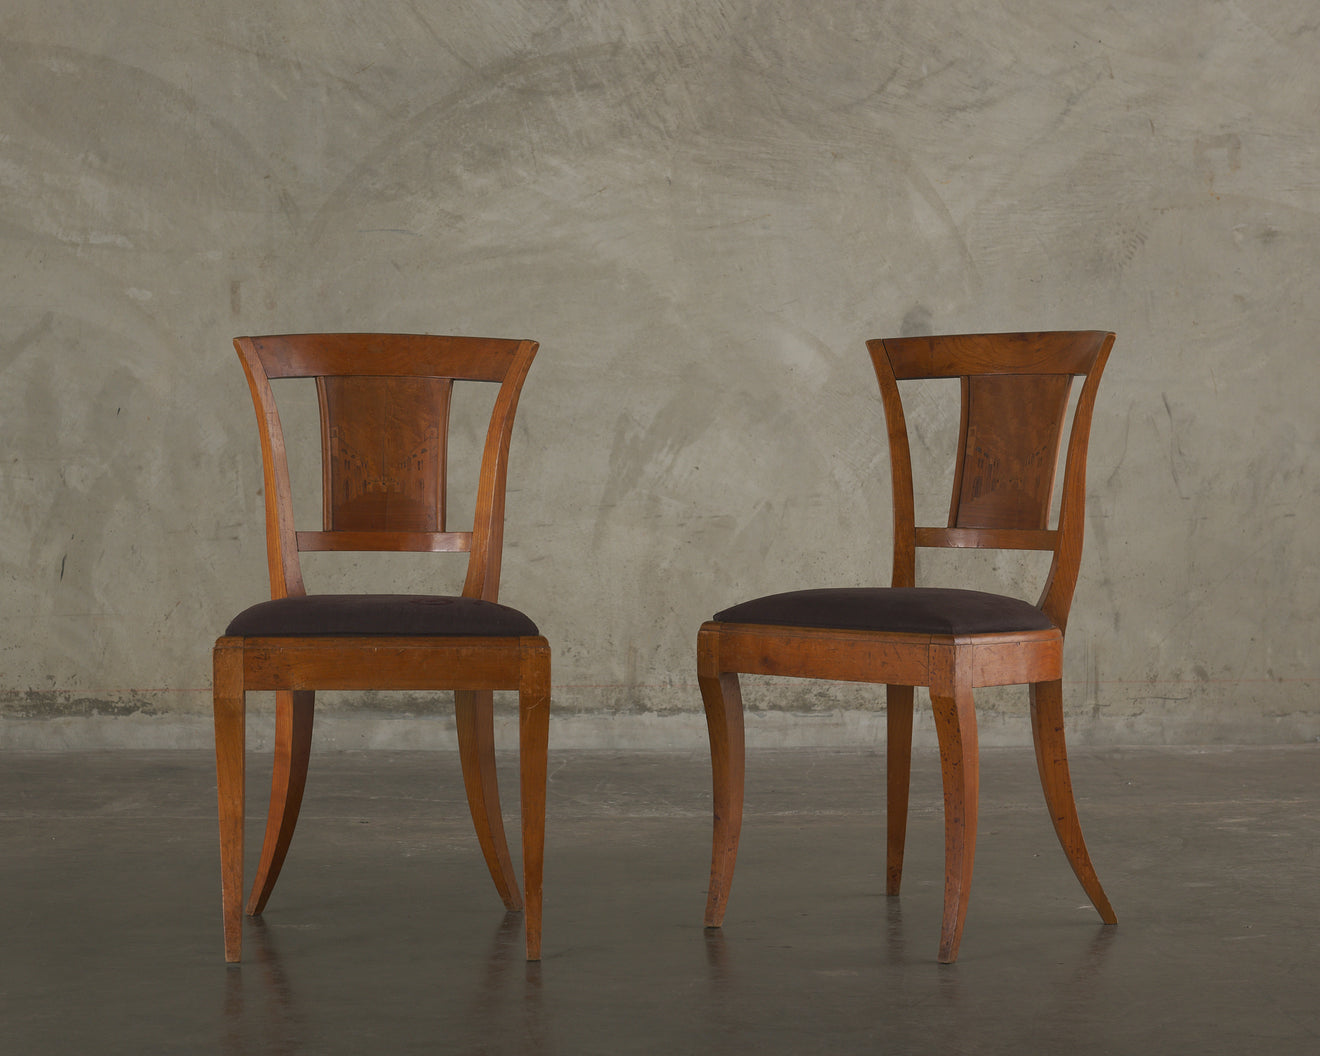 ITALIAN  SIDE CHAIRS WITH MARQUETRY BACKS